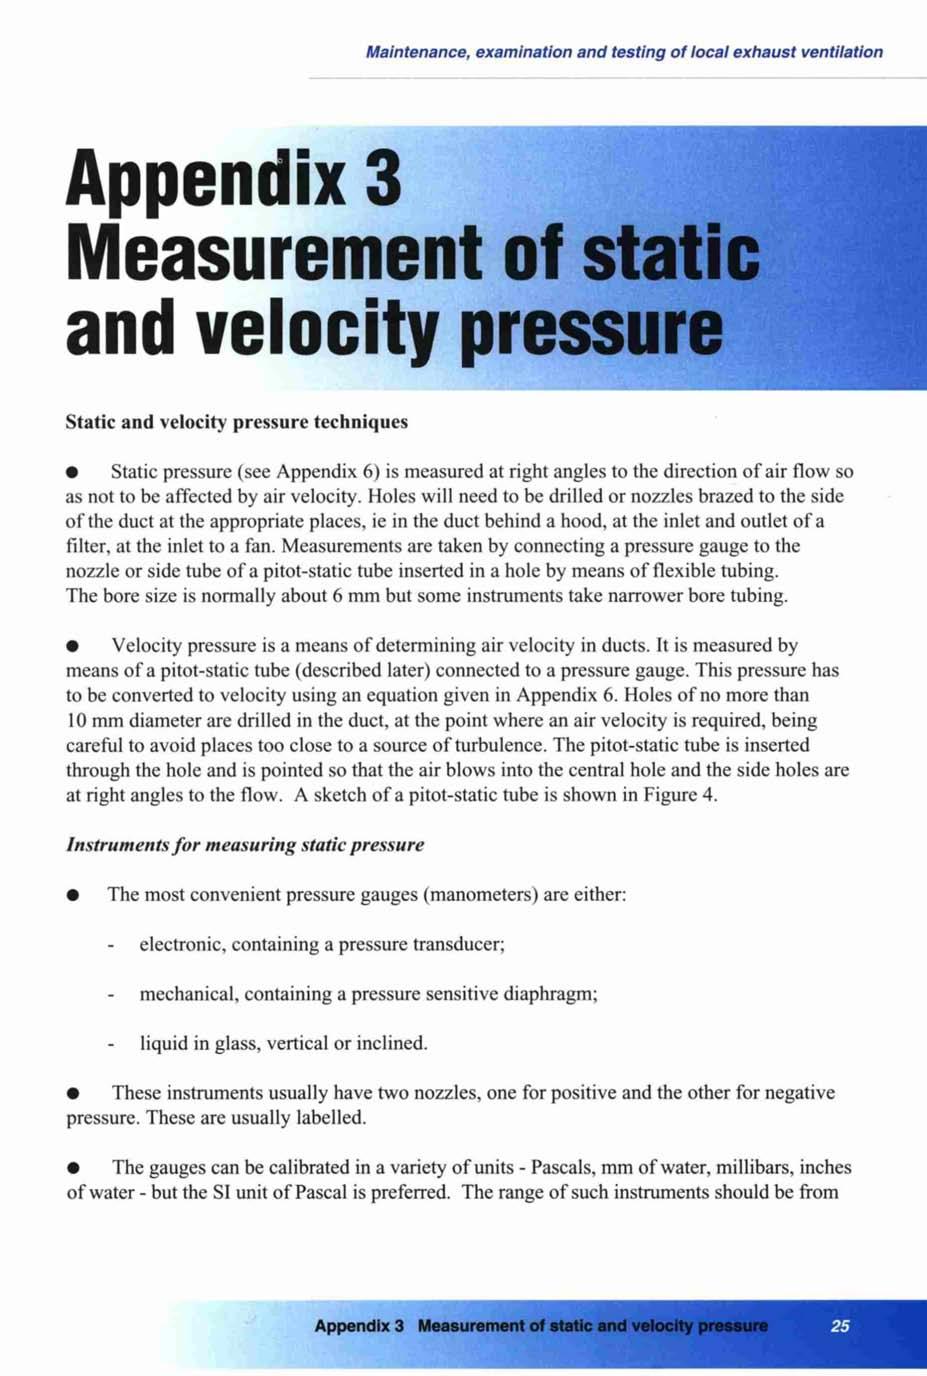 r. Maintenance, examination and testing of local exhaust ventilation Appendix 3 Measurement of static and velocity pressure Static and velocity pressure techniques Static pressure (see Appendix 6) is